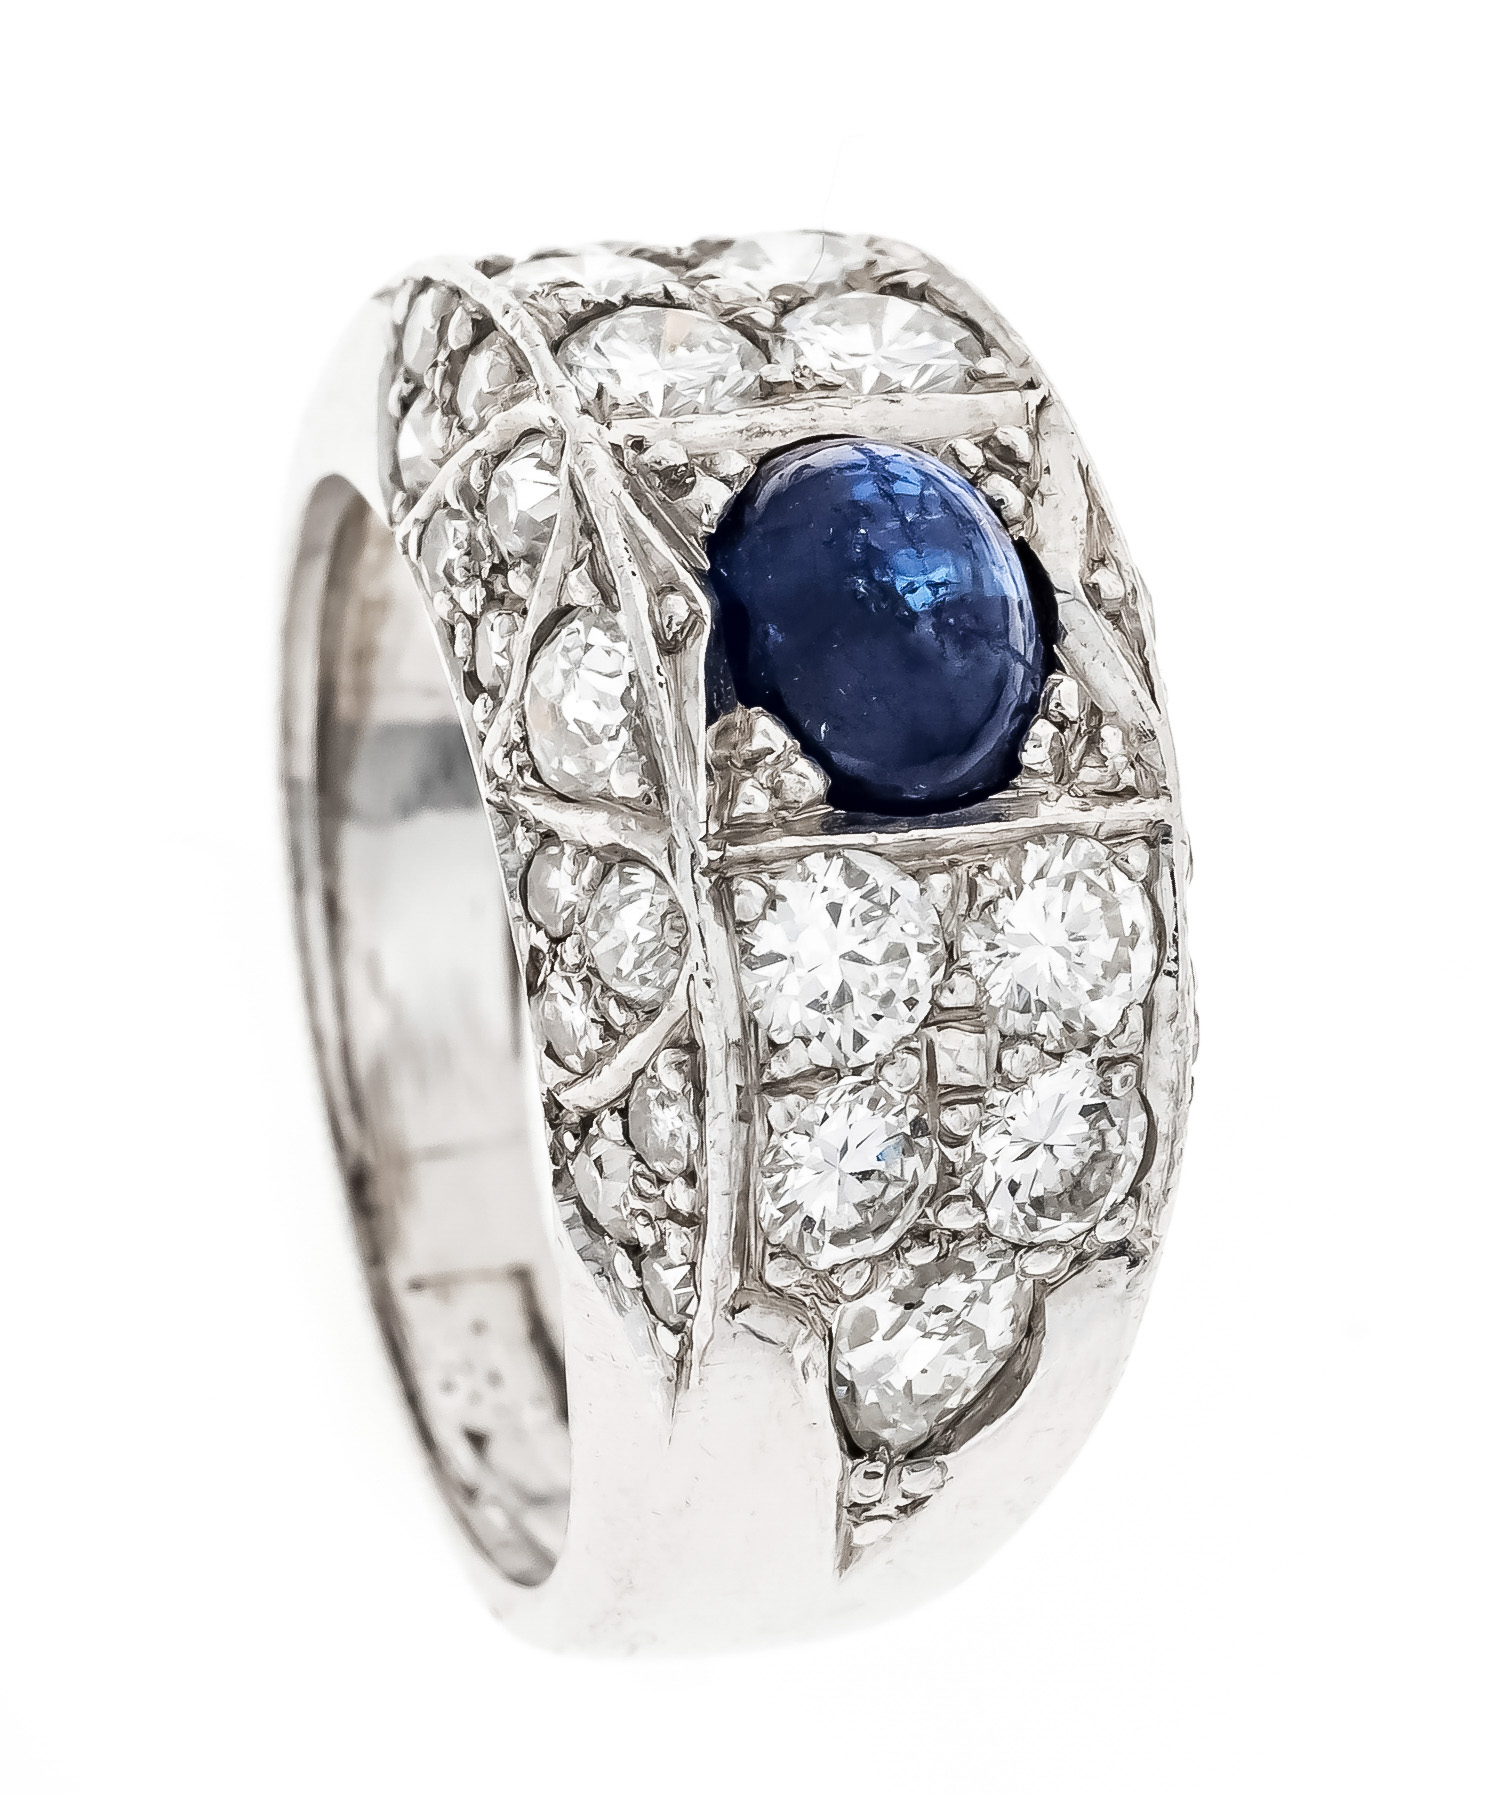 Sapphire diamond ring WG 750/000 with an oval sapphire cabochon 6.0 x 4.9 mm, translucent blue,